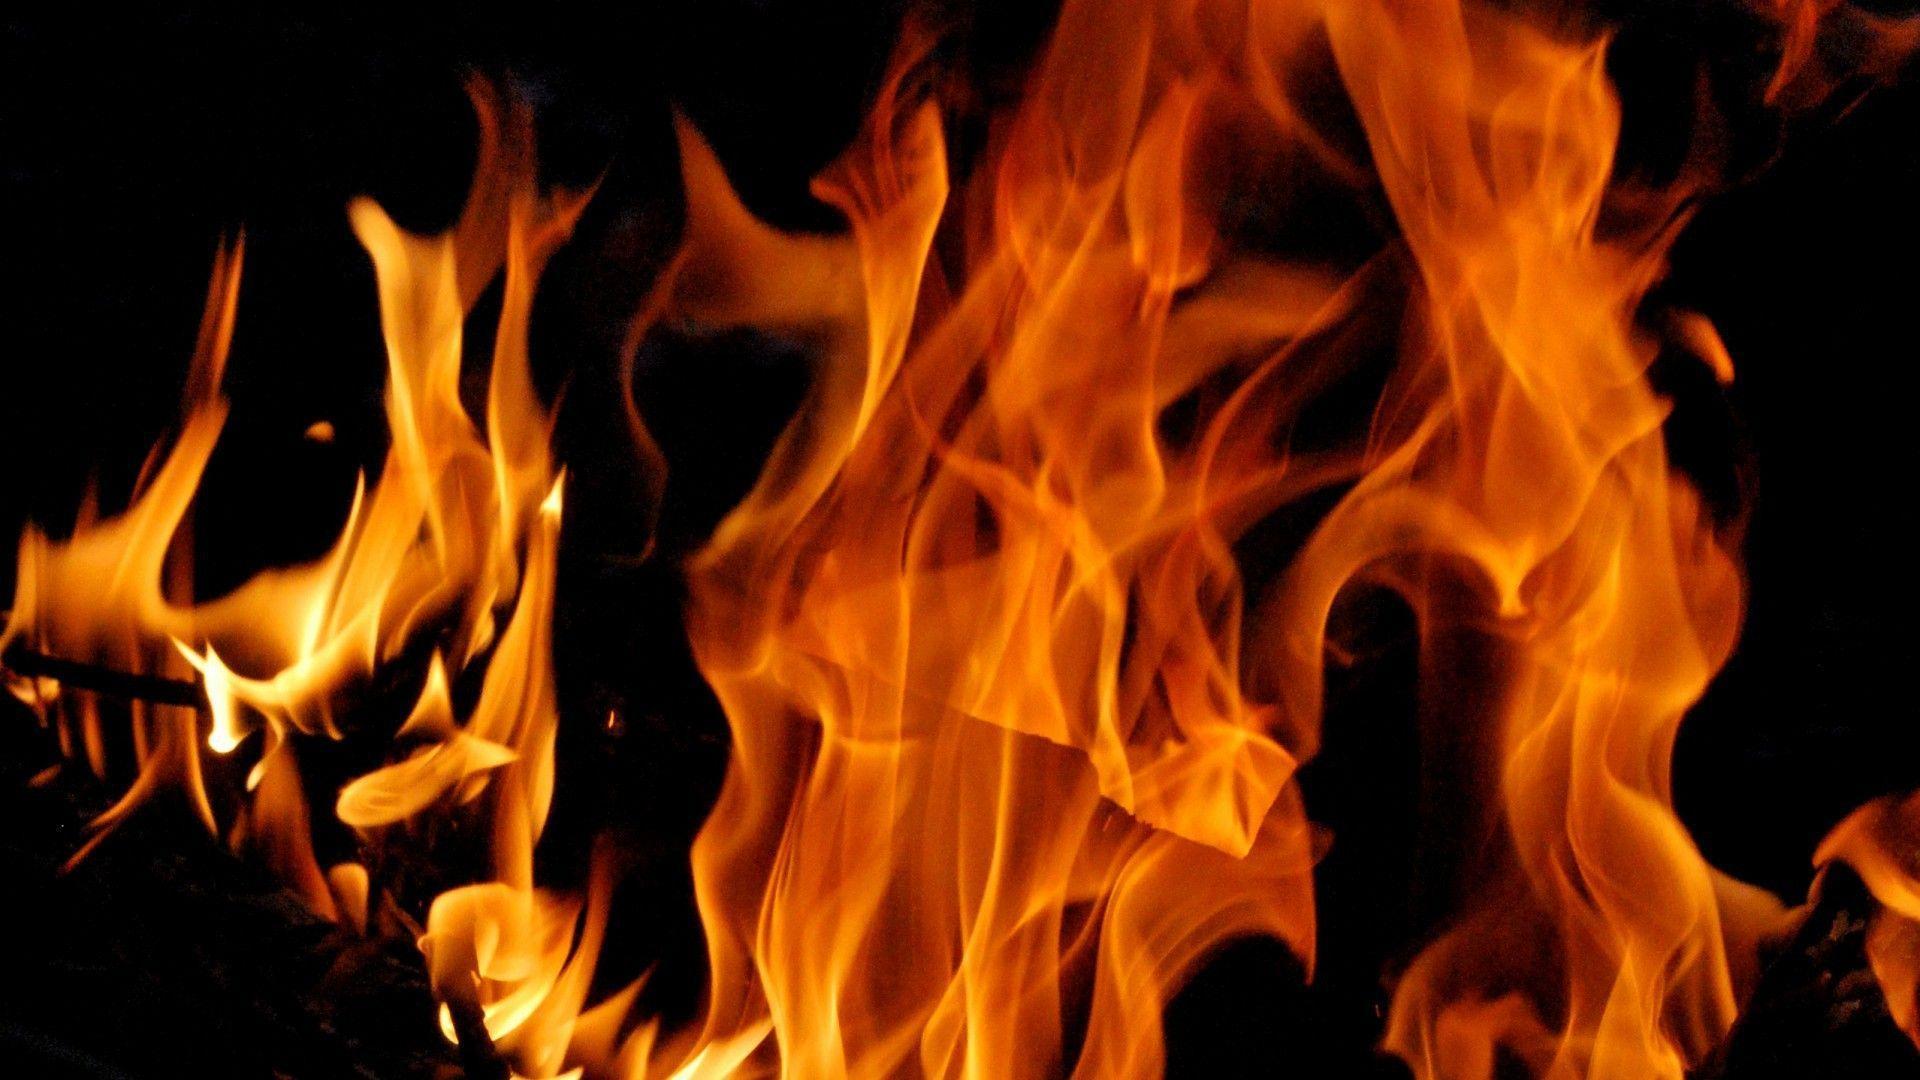 Flames in Fireplace Wallpaper HD Image